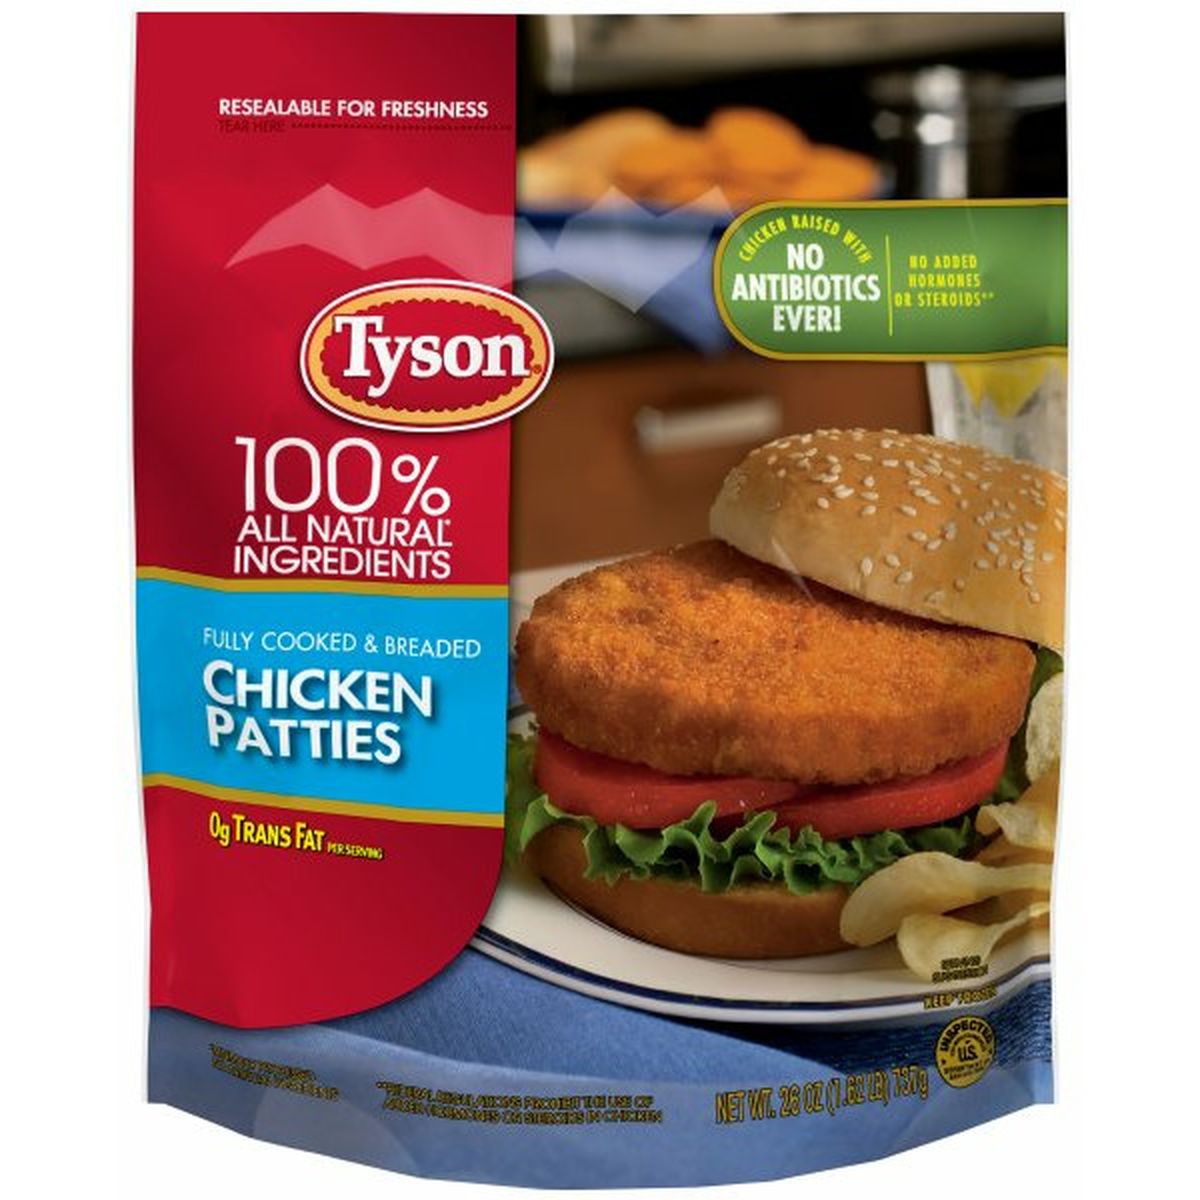 Calories in Tyson Fully Cooked Frozen Chicken Patties